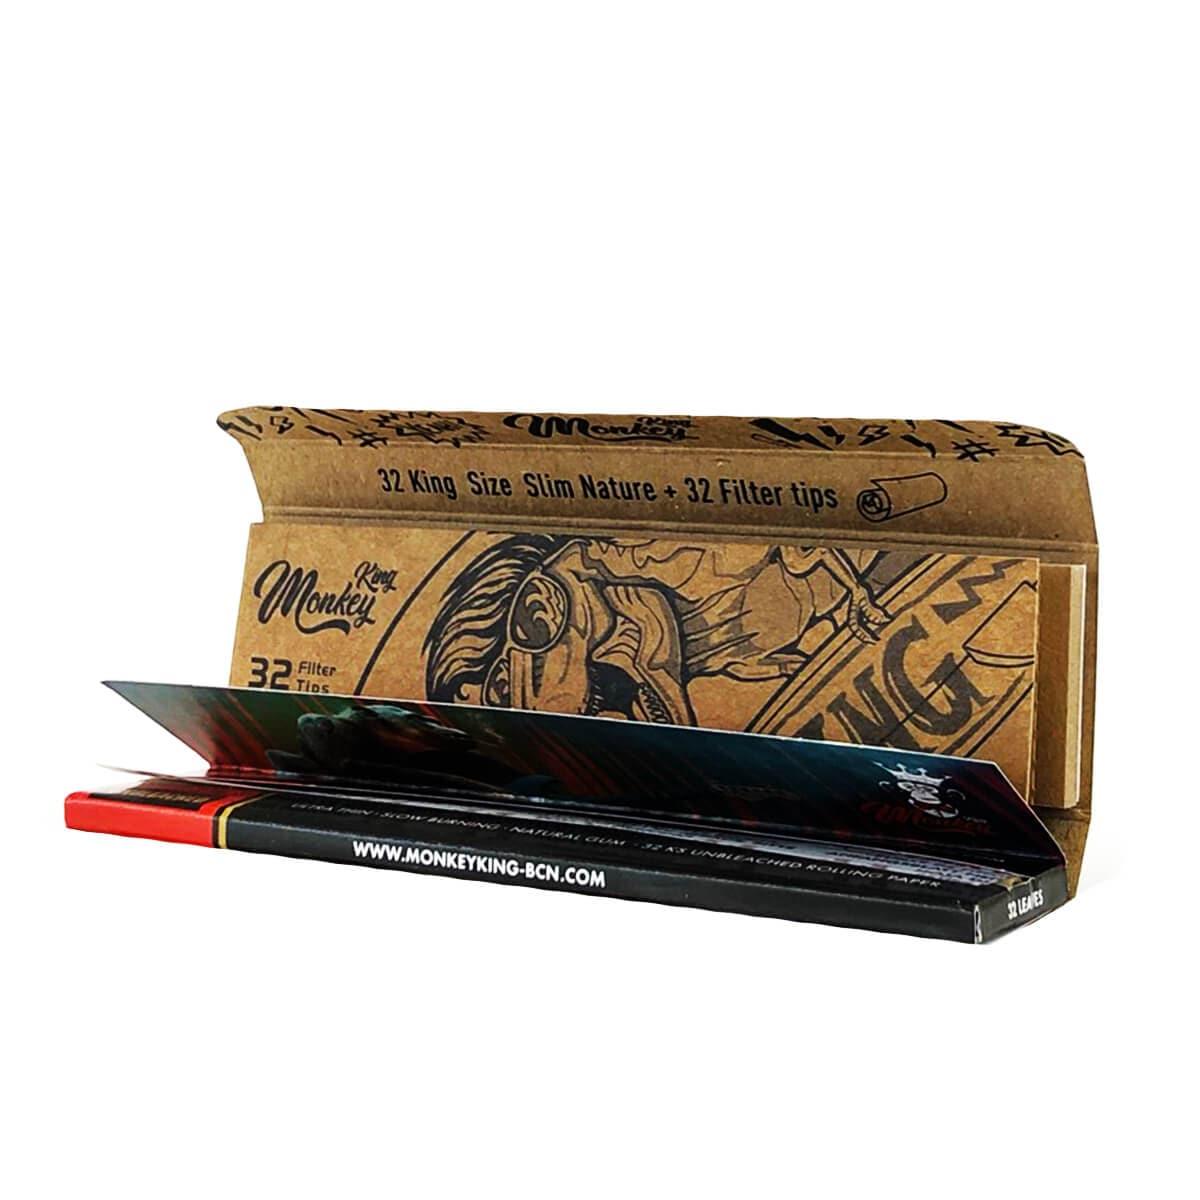 Monkey King's Woodpack Unbleached Rolling Paper + Tips - HAPPYTRAIL